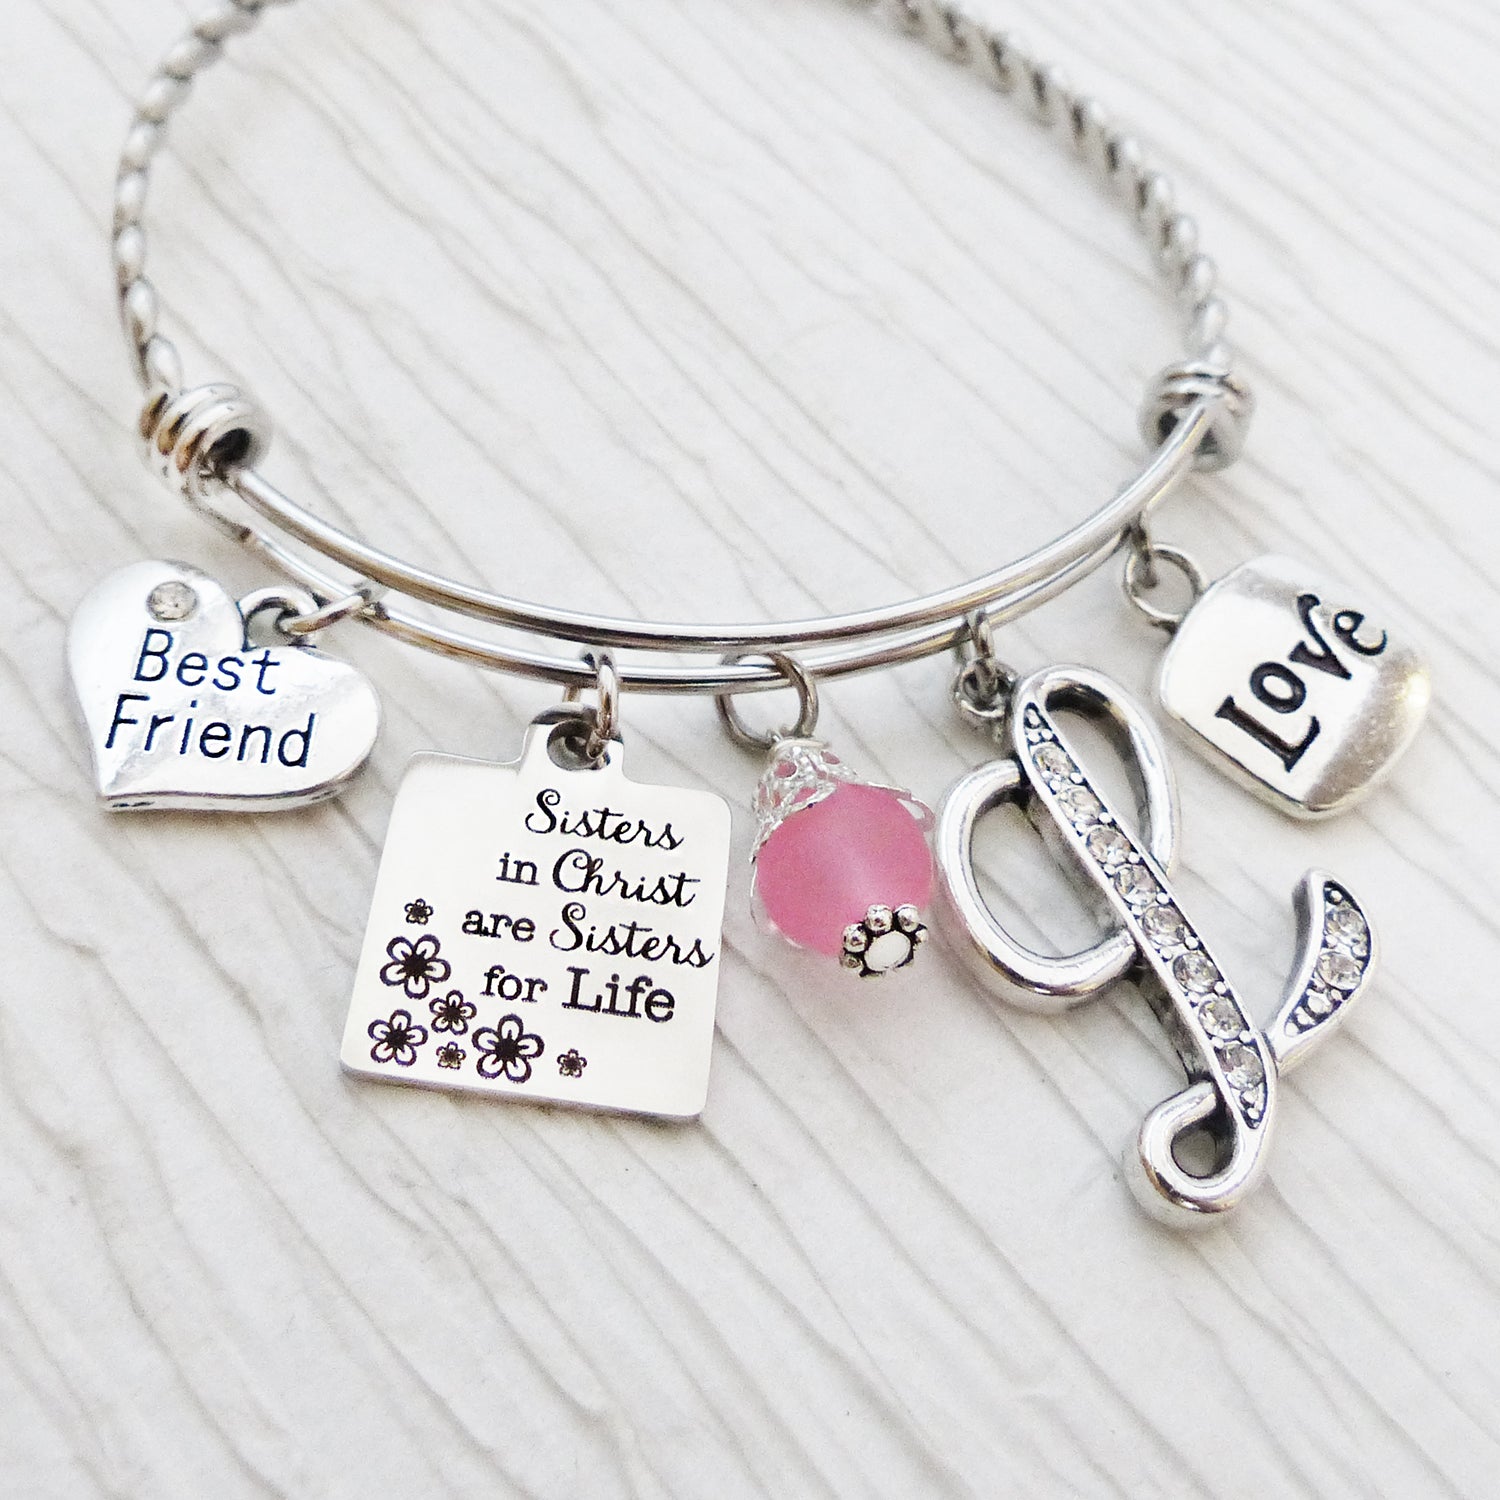 personalized bangle bracelet with rhinestone letter charm and sister in Christ and sisters for life charm, Best friend charm love charm with pink bead